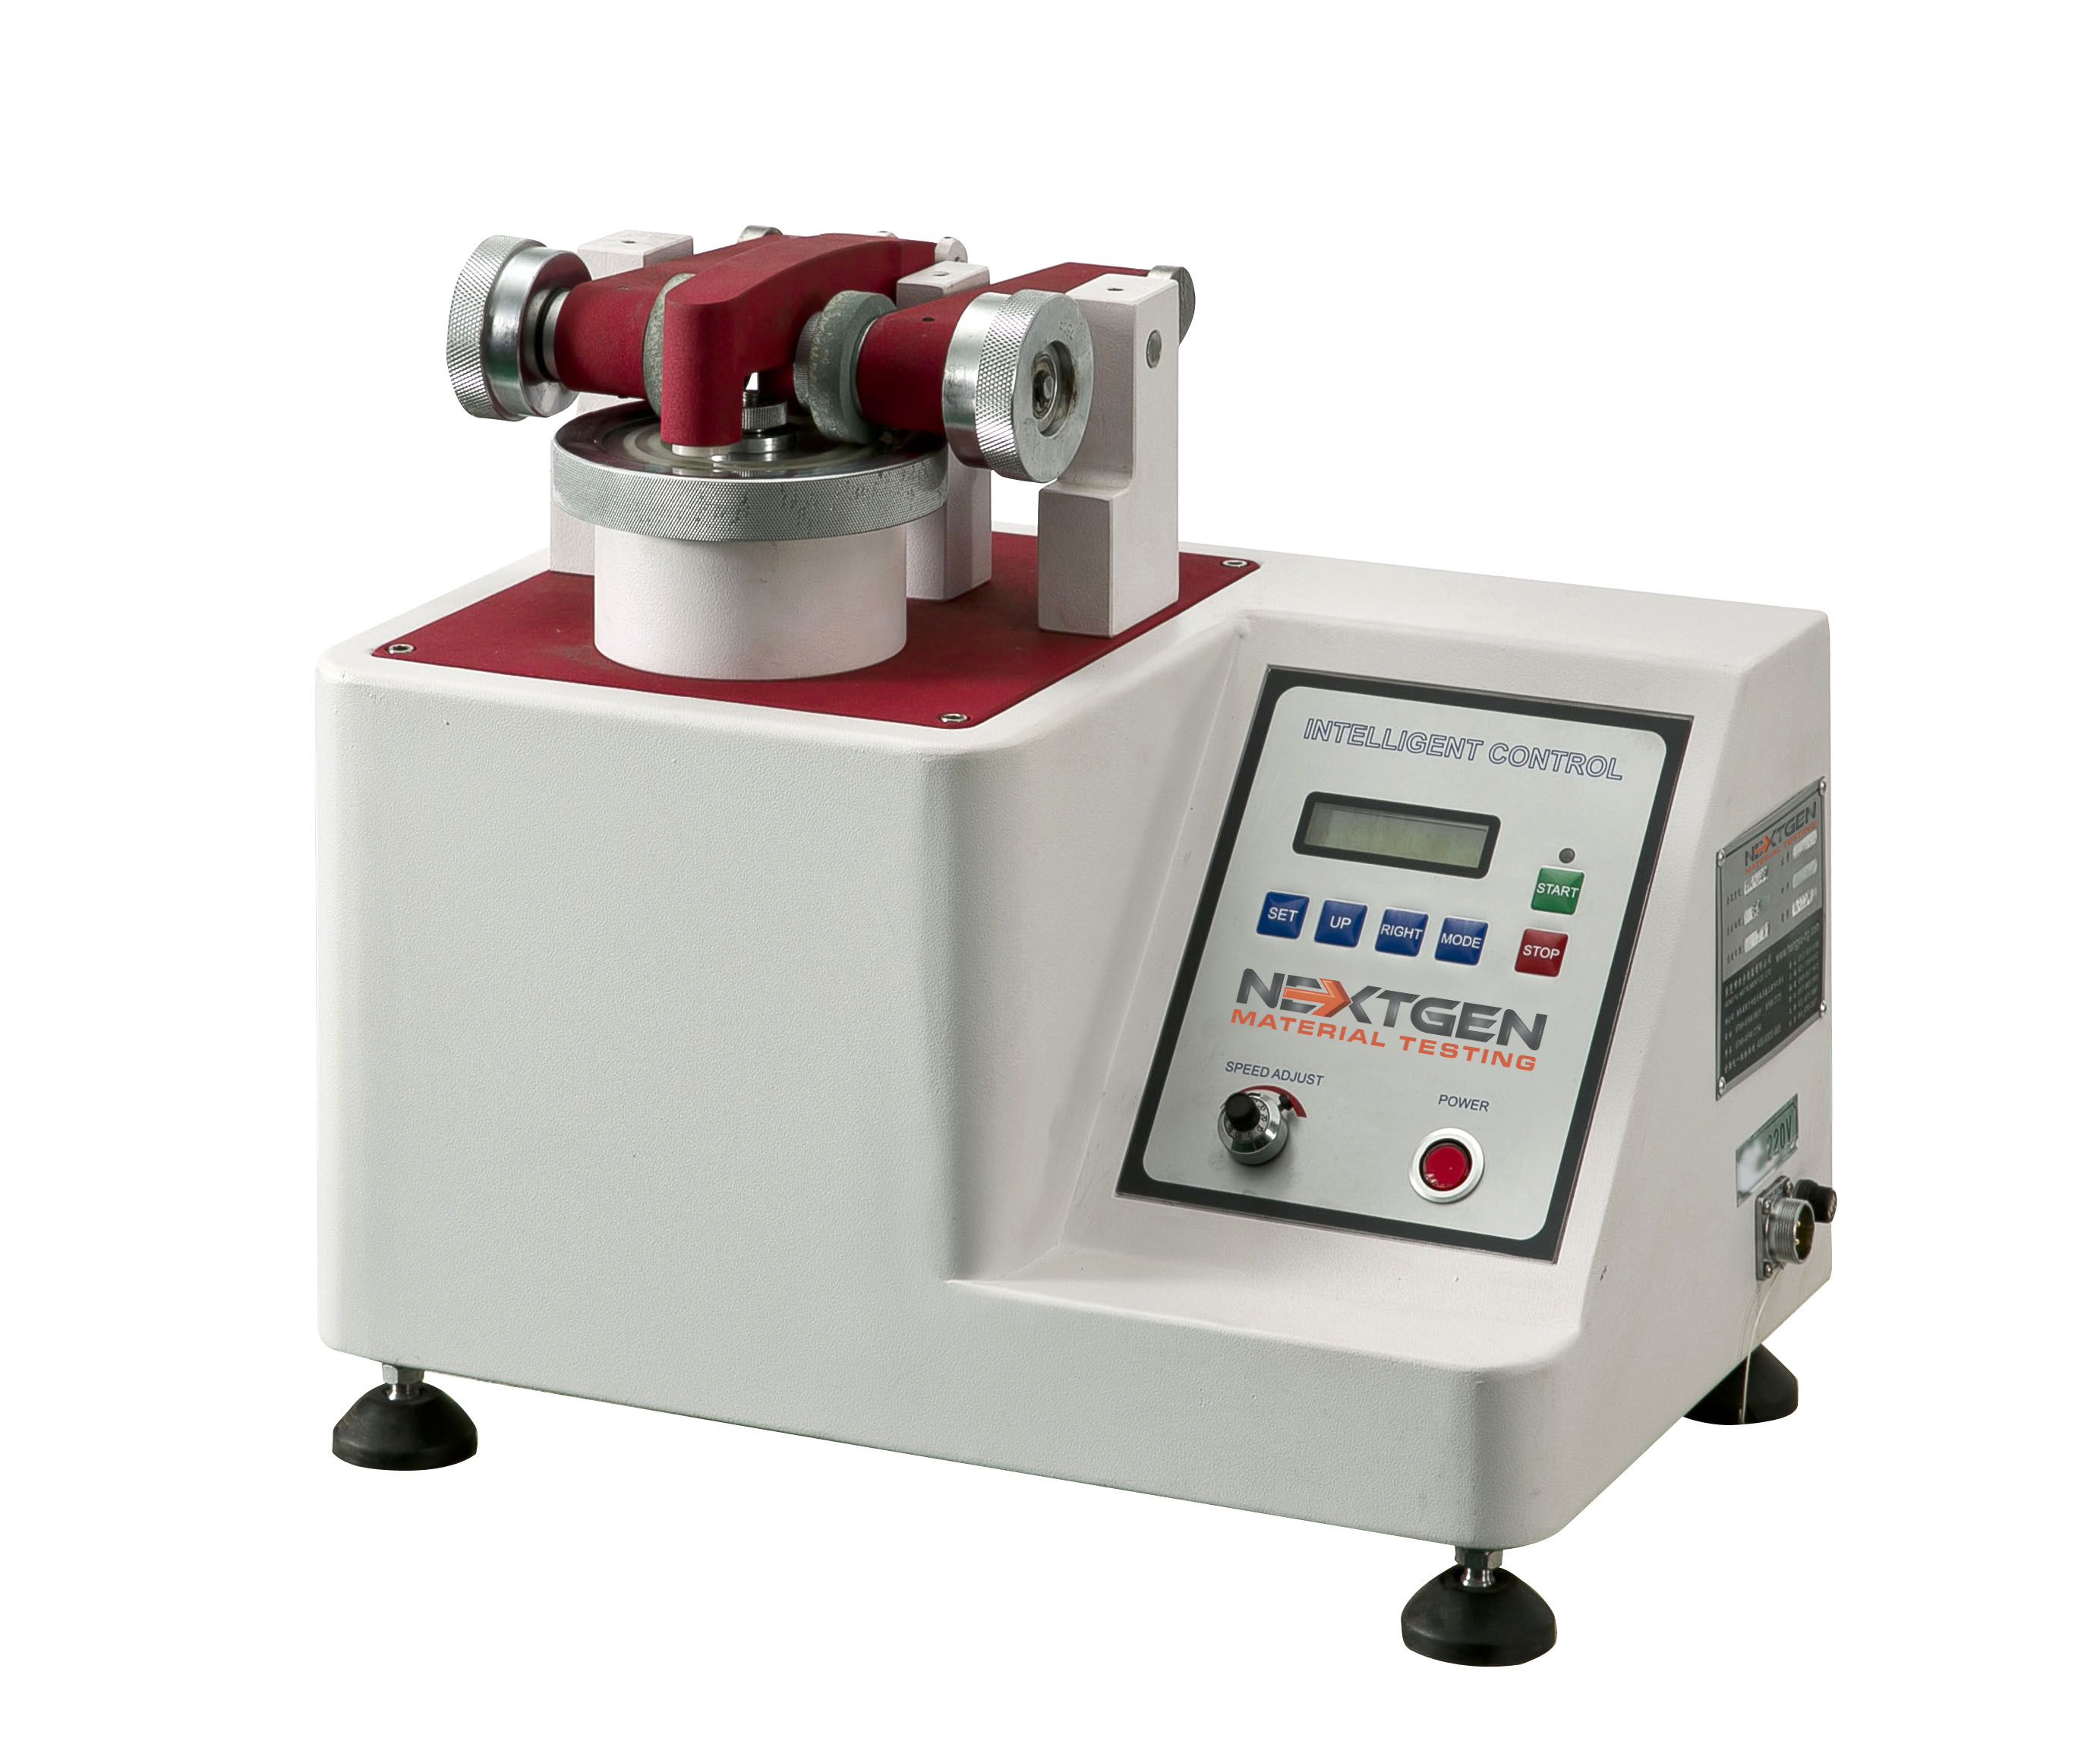 Certified Taber Abrasion Tester to Determine Material Wear Resistance